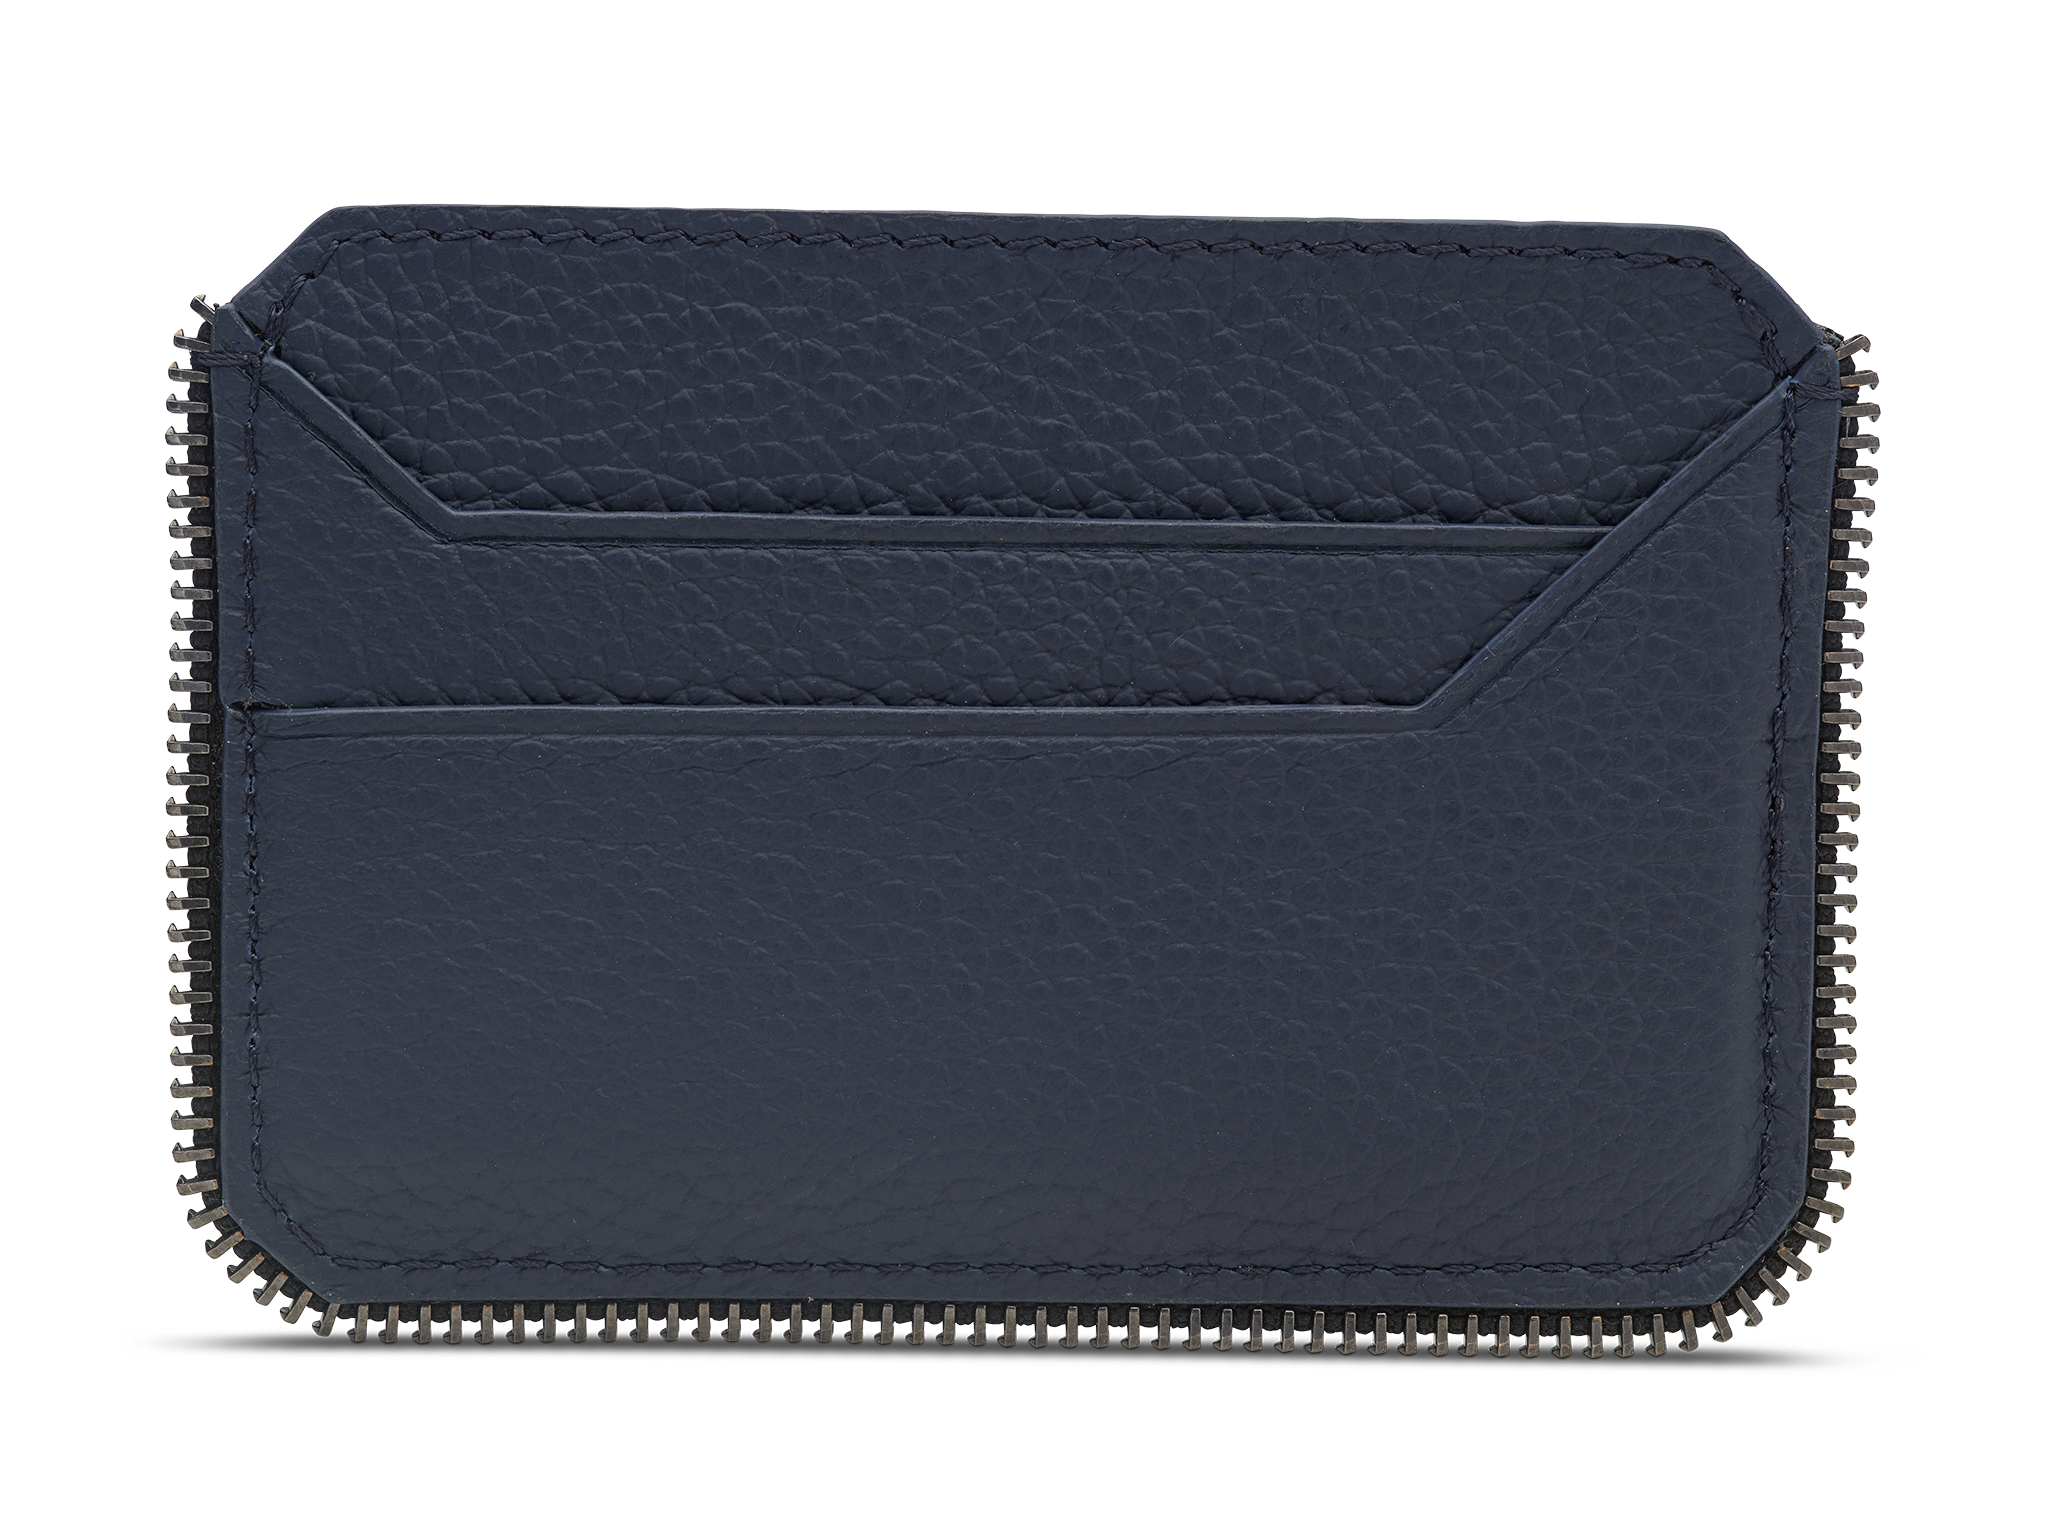 Cardholder in Navy leather